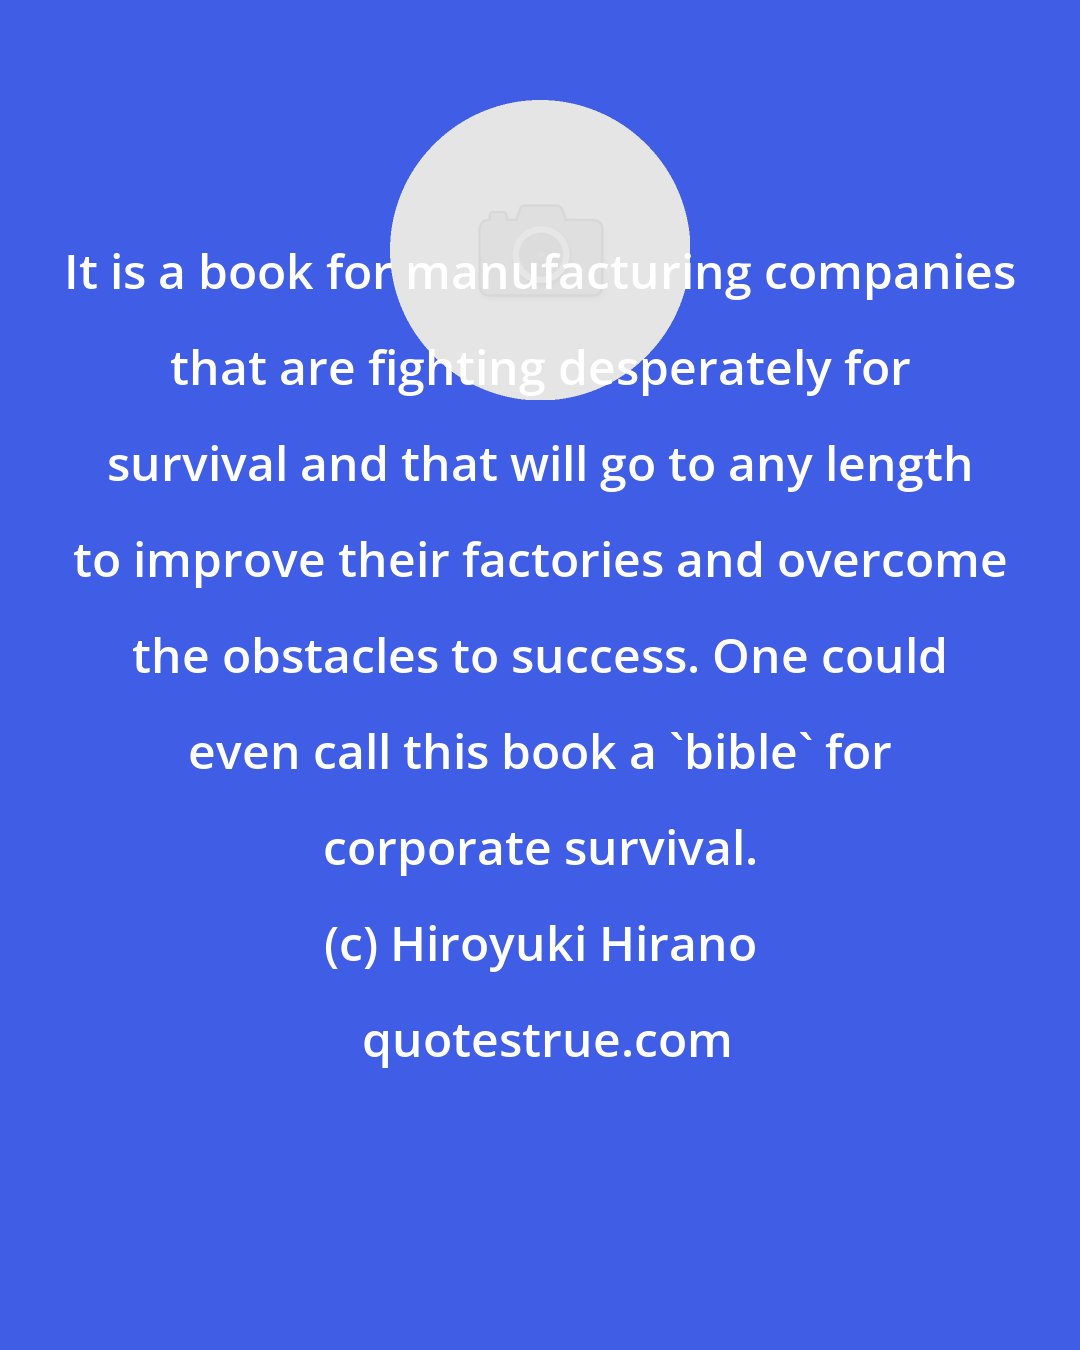 Hiroyuki Hirano: It is a book for manufacturing companies that are fighting desperately for survival and that will go to any length to improve their factories and overcome the obstacles to success. One could even call this book a 'bible' for corporate survival.